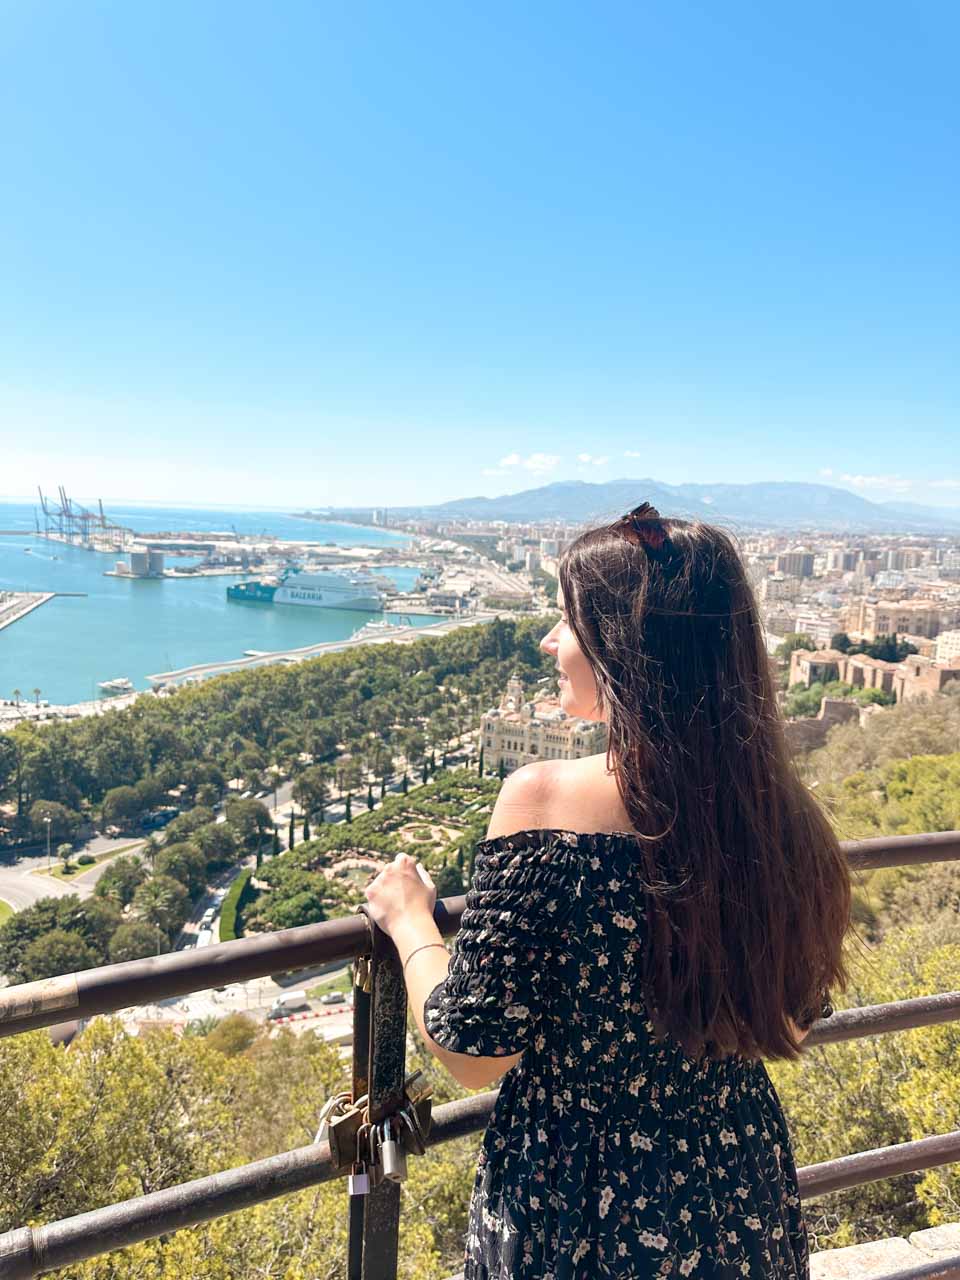 A woman with long dark hair admiring the view of Malaga’s city and sea from a spot on the way up to Gibralfaro Castle